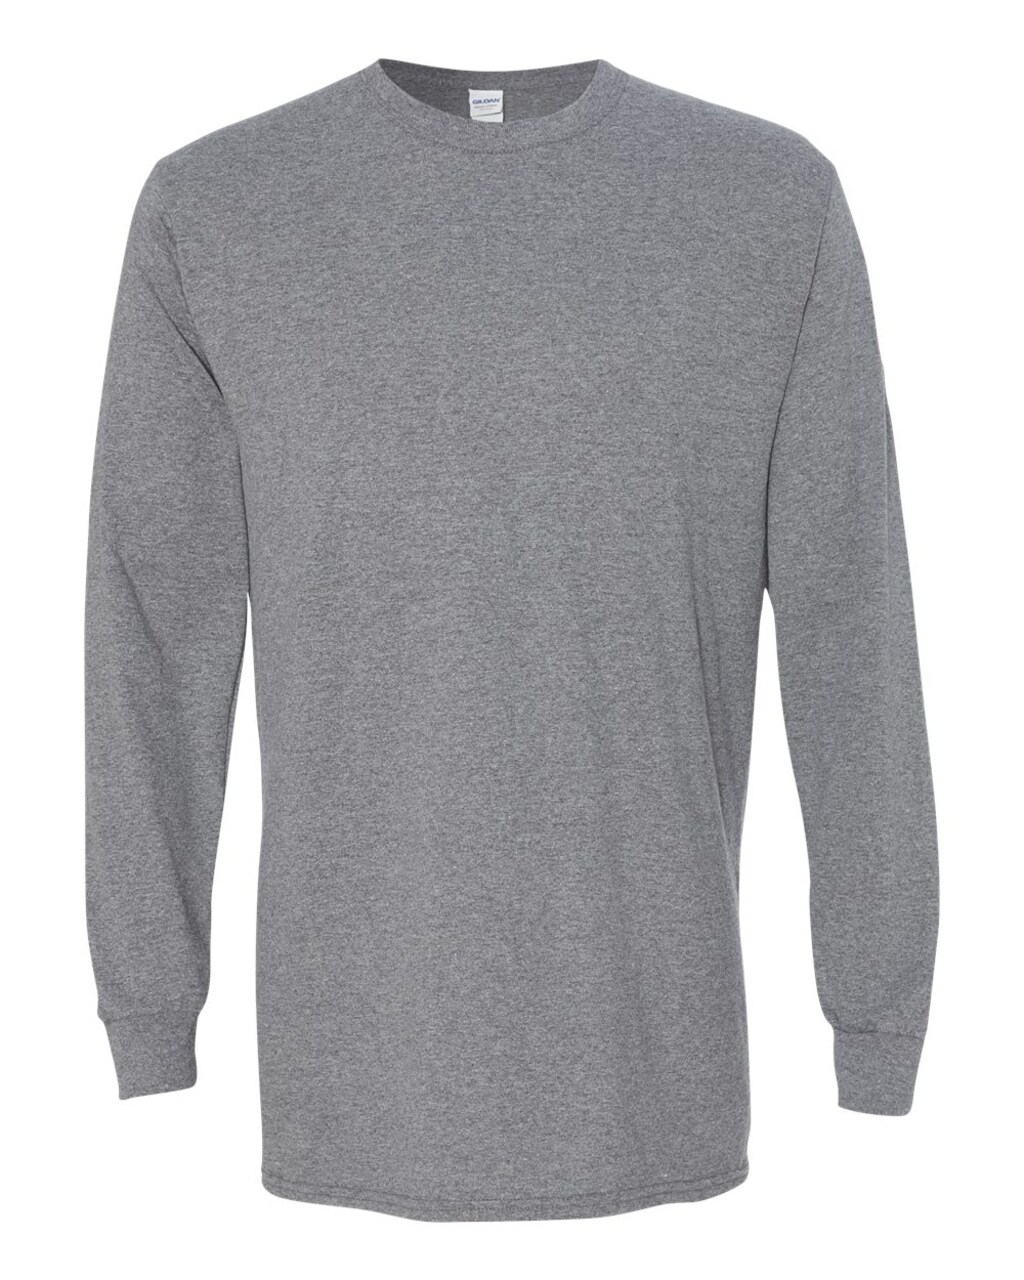 Heavy Cotton Long Sleeve T-Shirt | Cozy Comfort Meets Effortless Style Classic fit, Perfect Blend in a New Way, Wrapped in Warmth and Fashion-Forward Design, Essential Piece for Cooler Weather | RADYAN